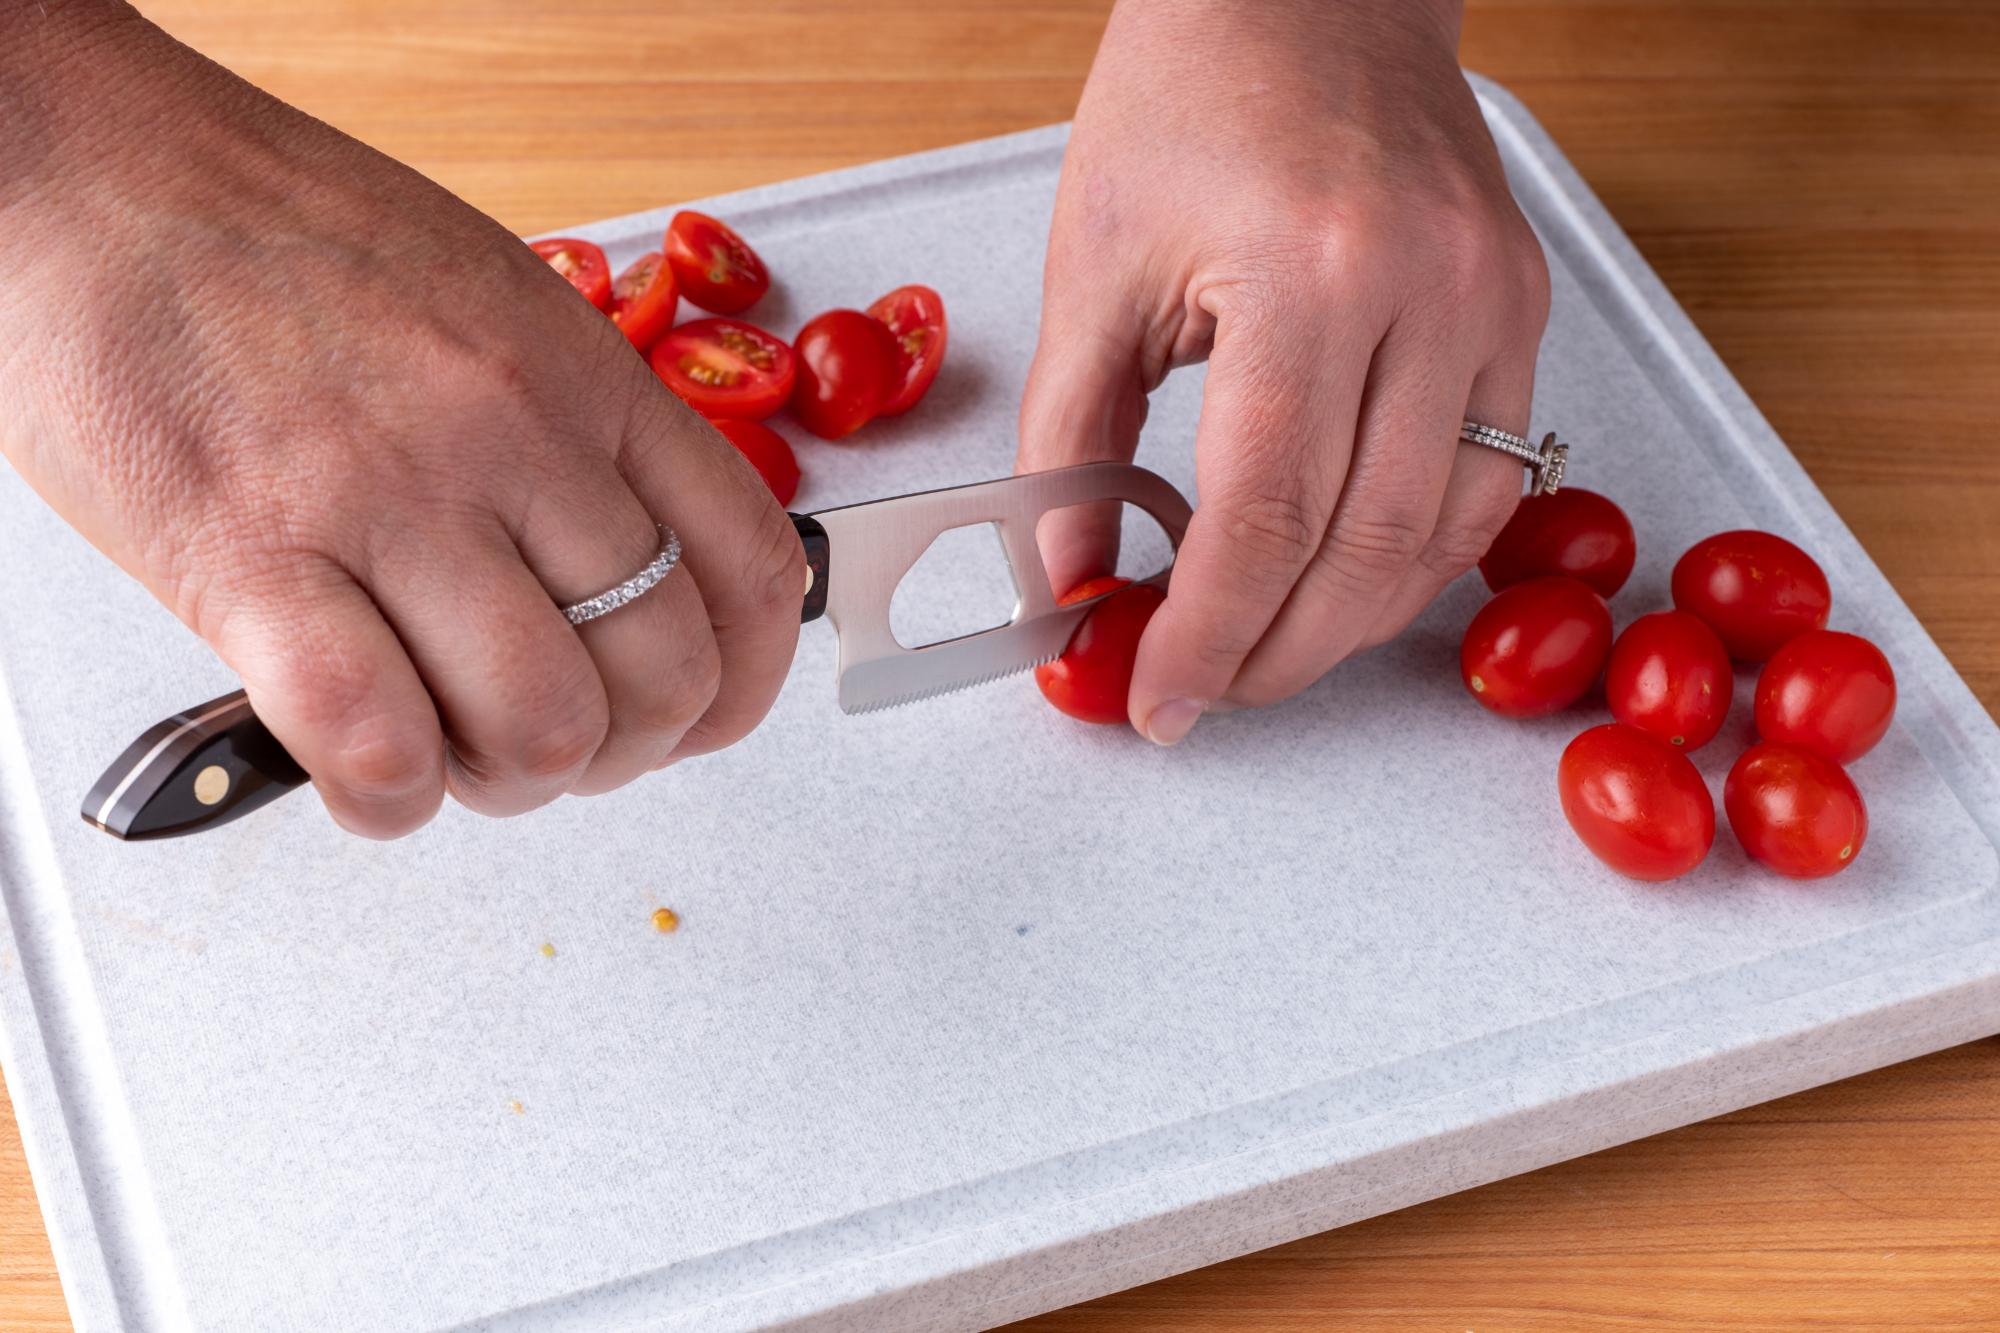 The Santoku-Style Cheese knife is perfect for halving tomatoes.